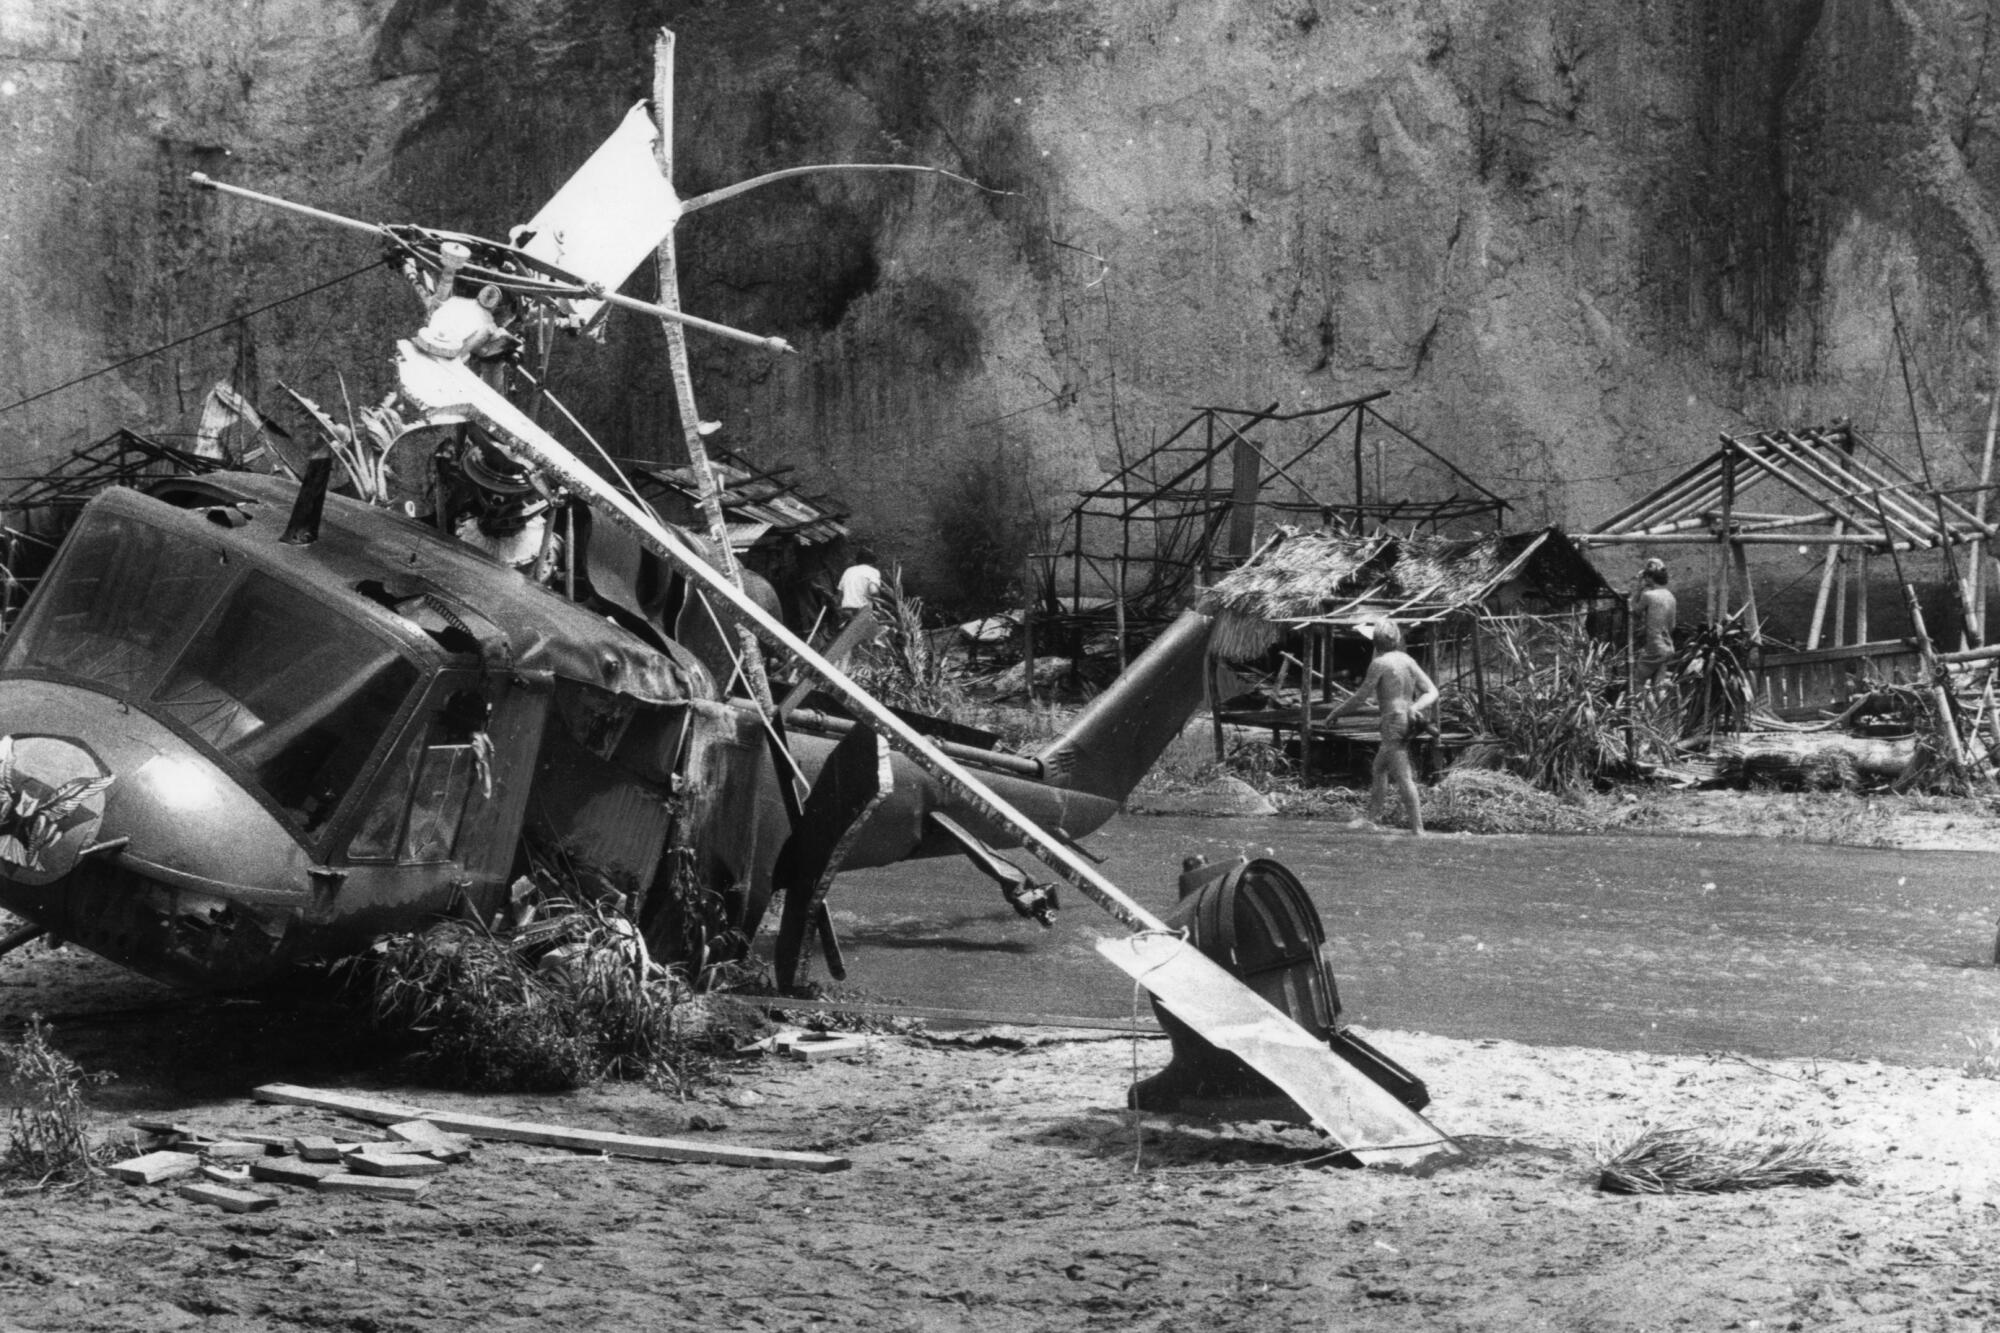 Helicopter wreckage and debris on the ground